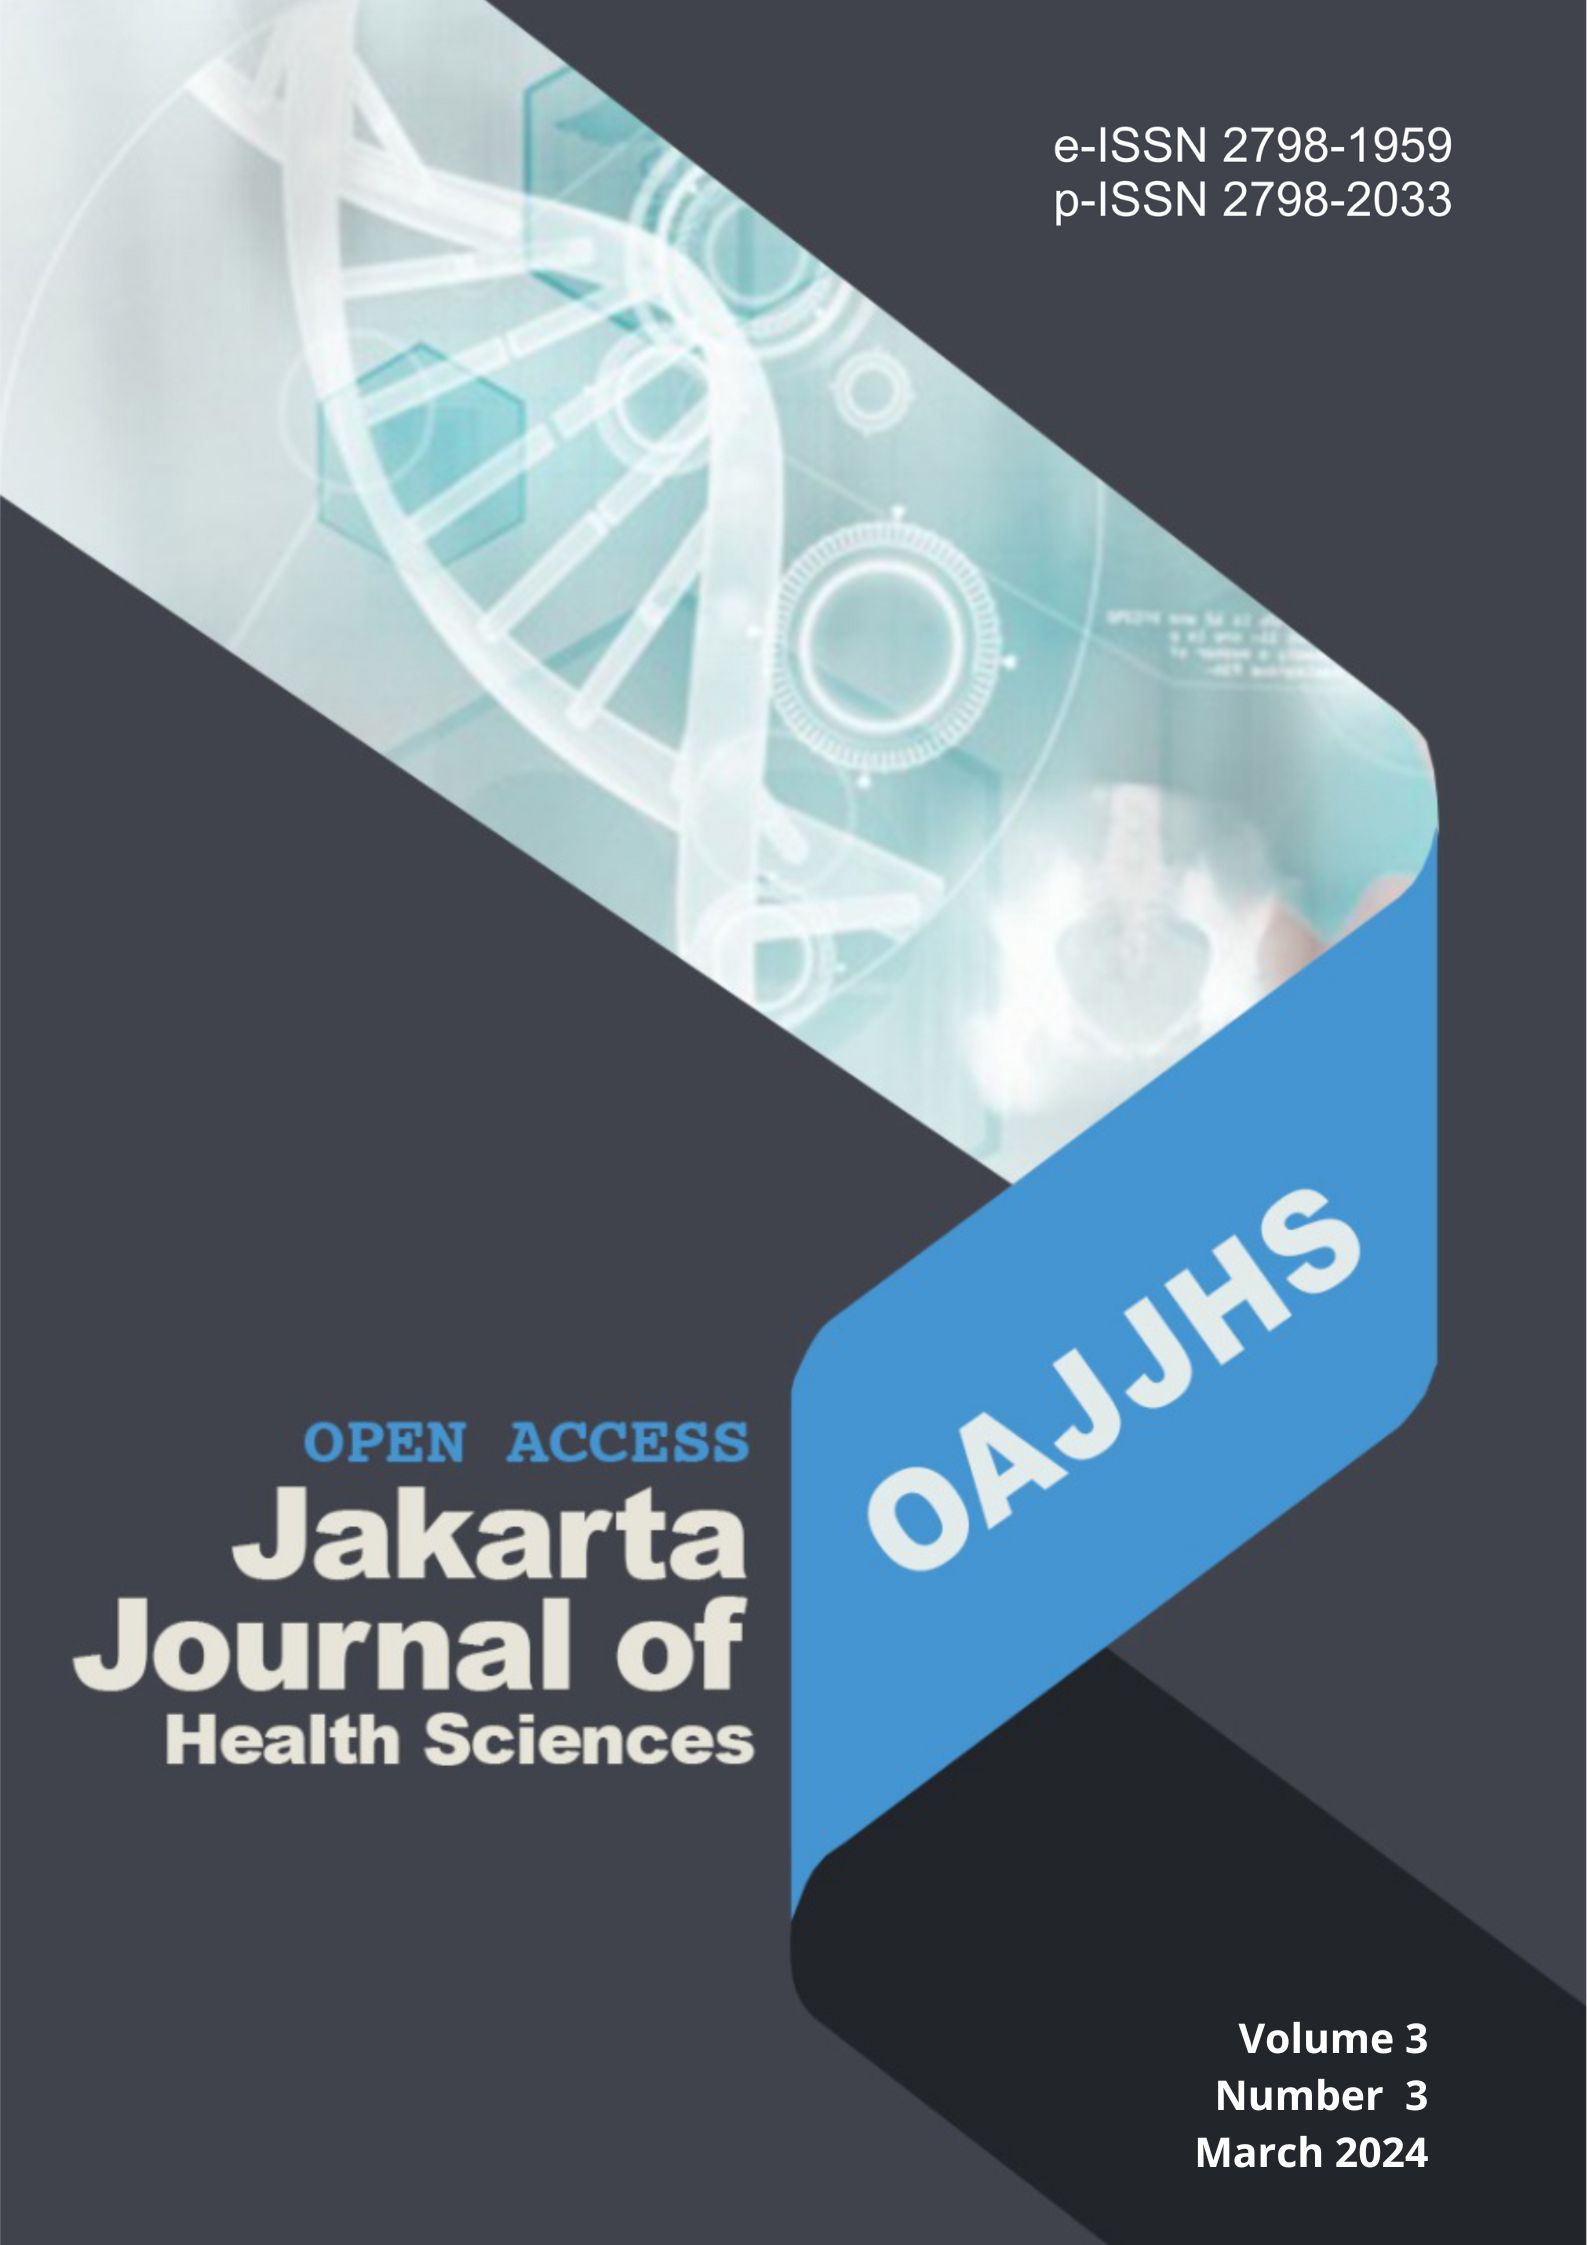 					View Vol. 3 No. 3 (2024): Open Access Jakarta Journal of Health Sciences
				